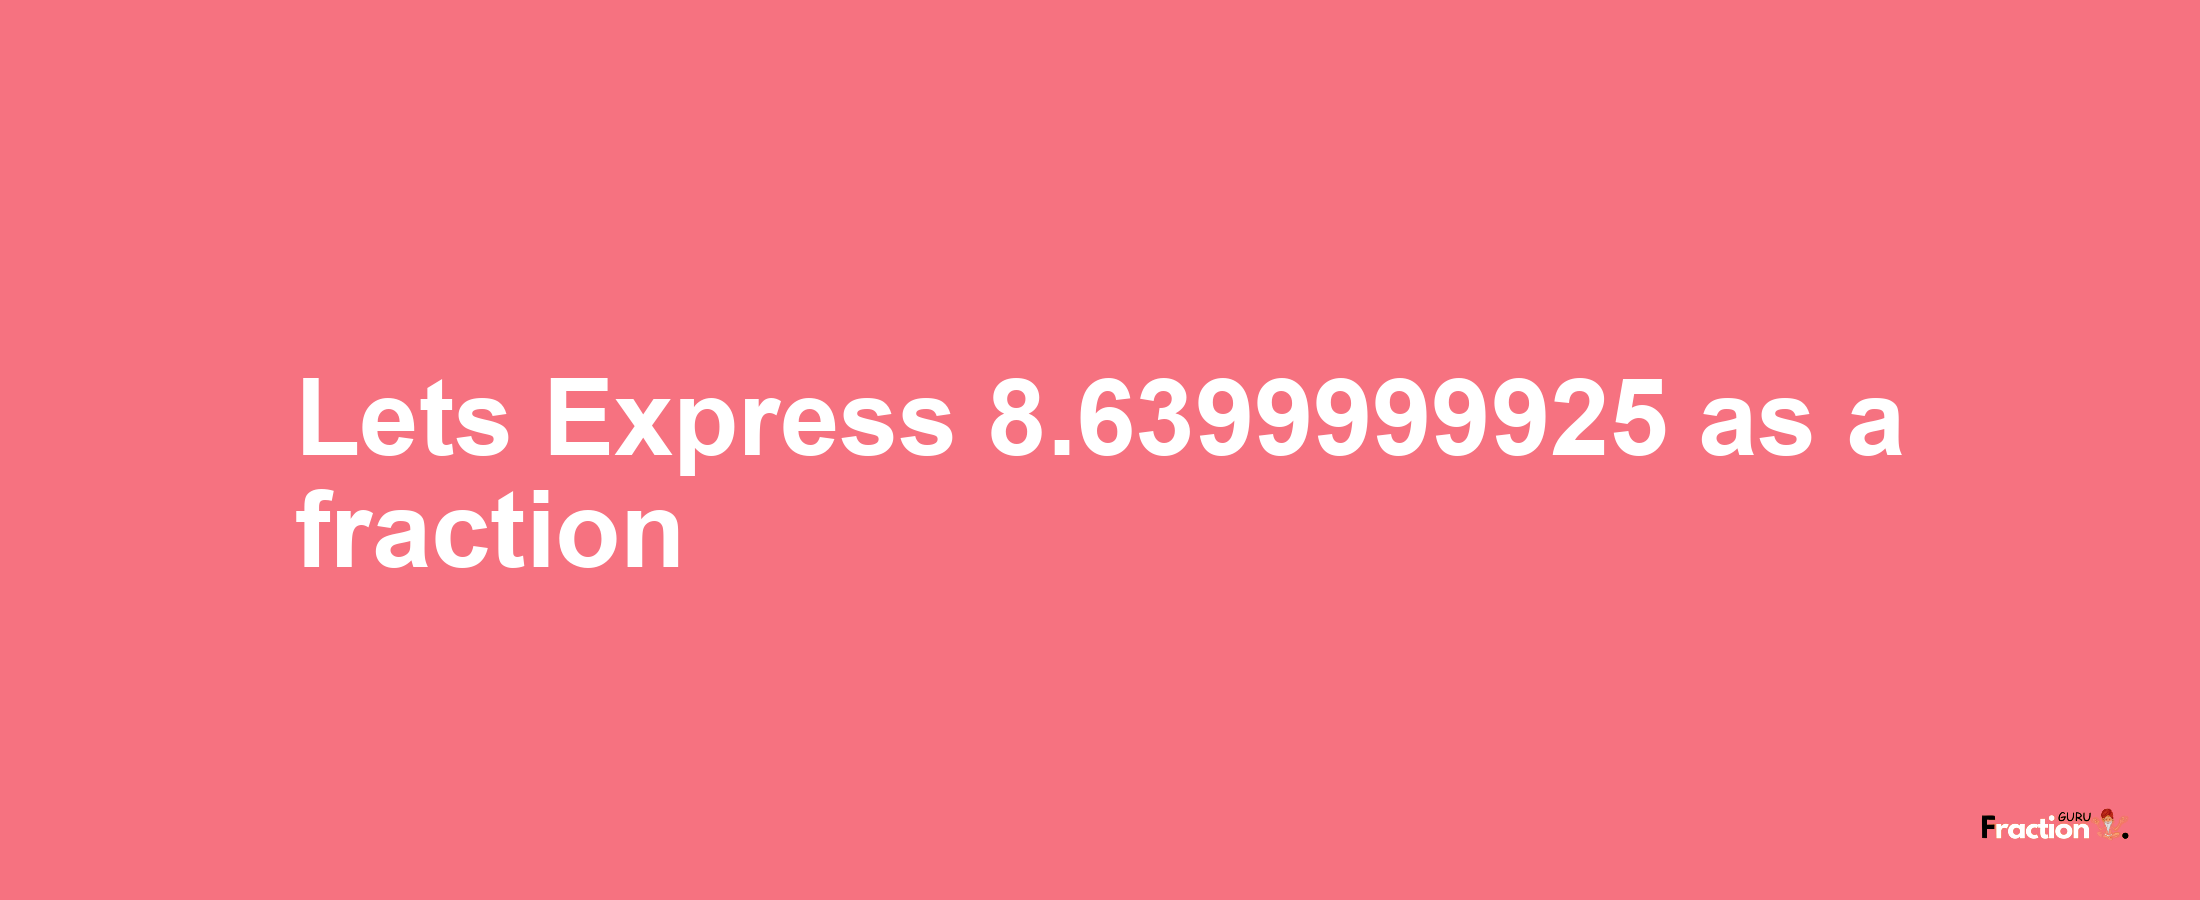 Lets Express 8.6399999925 as afraction